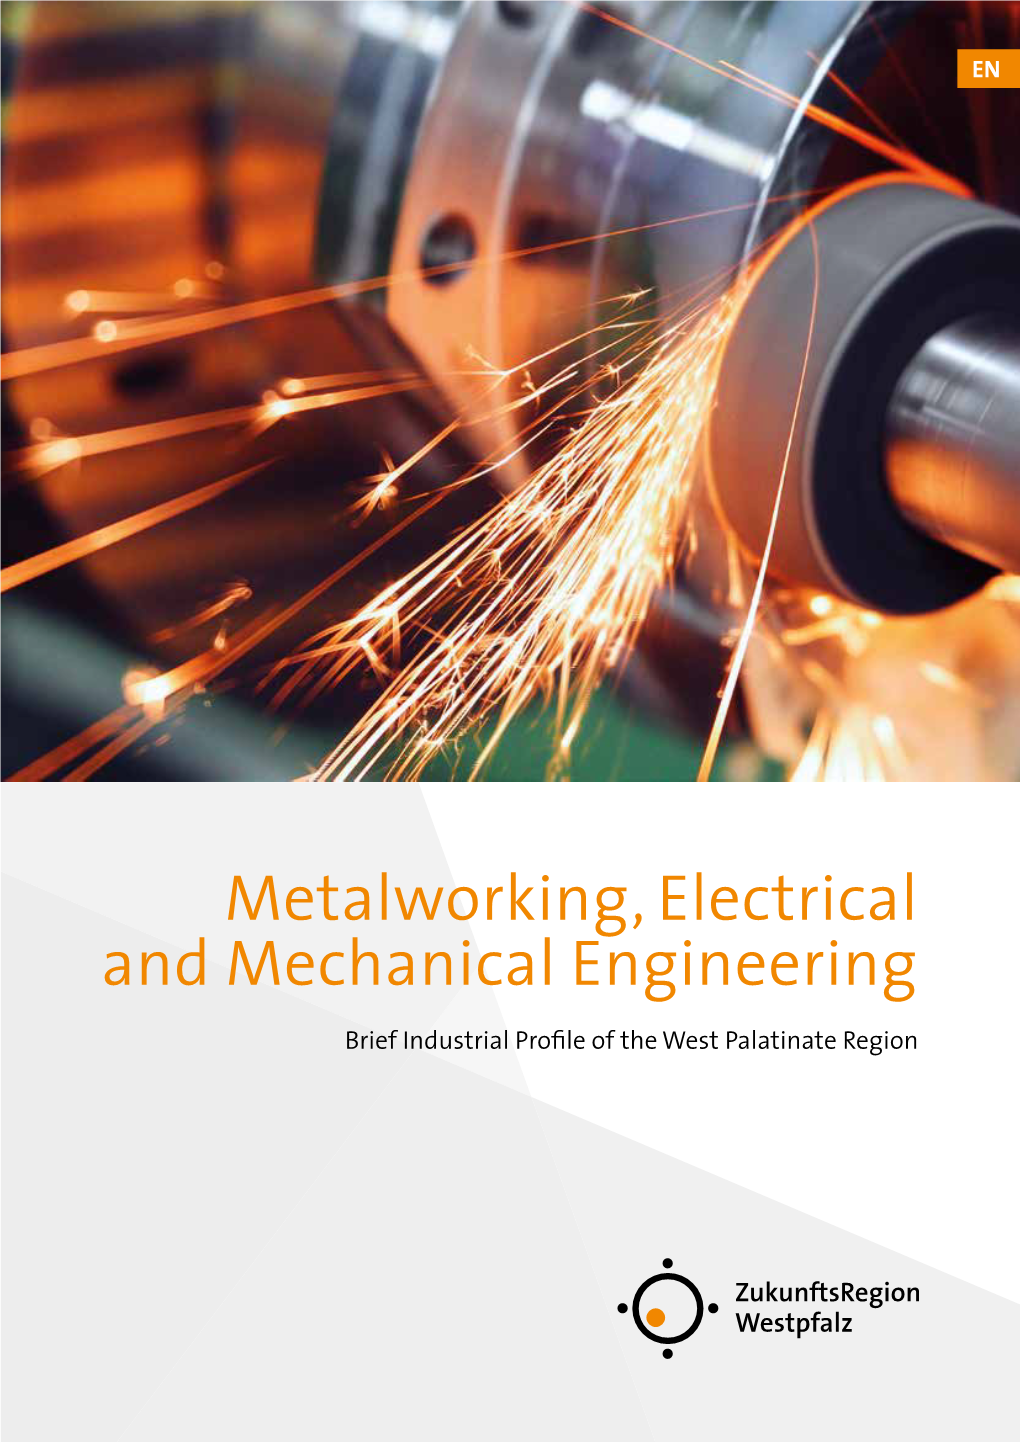 Metalworking, Electrical and Mechanical Engineering Brief Industrial Profile of the West Palatinate Region